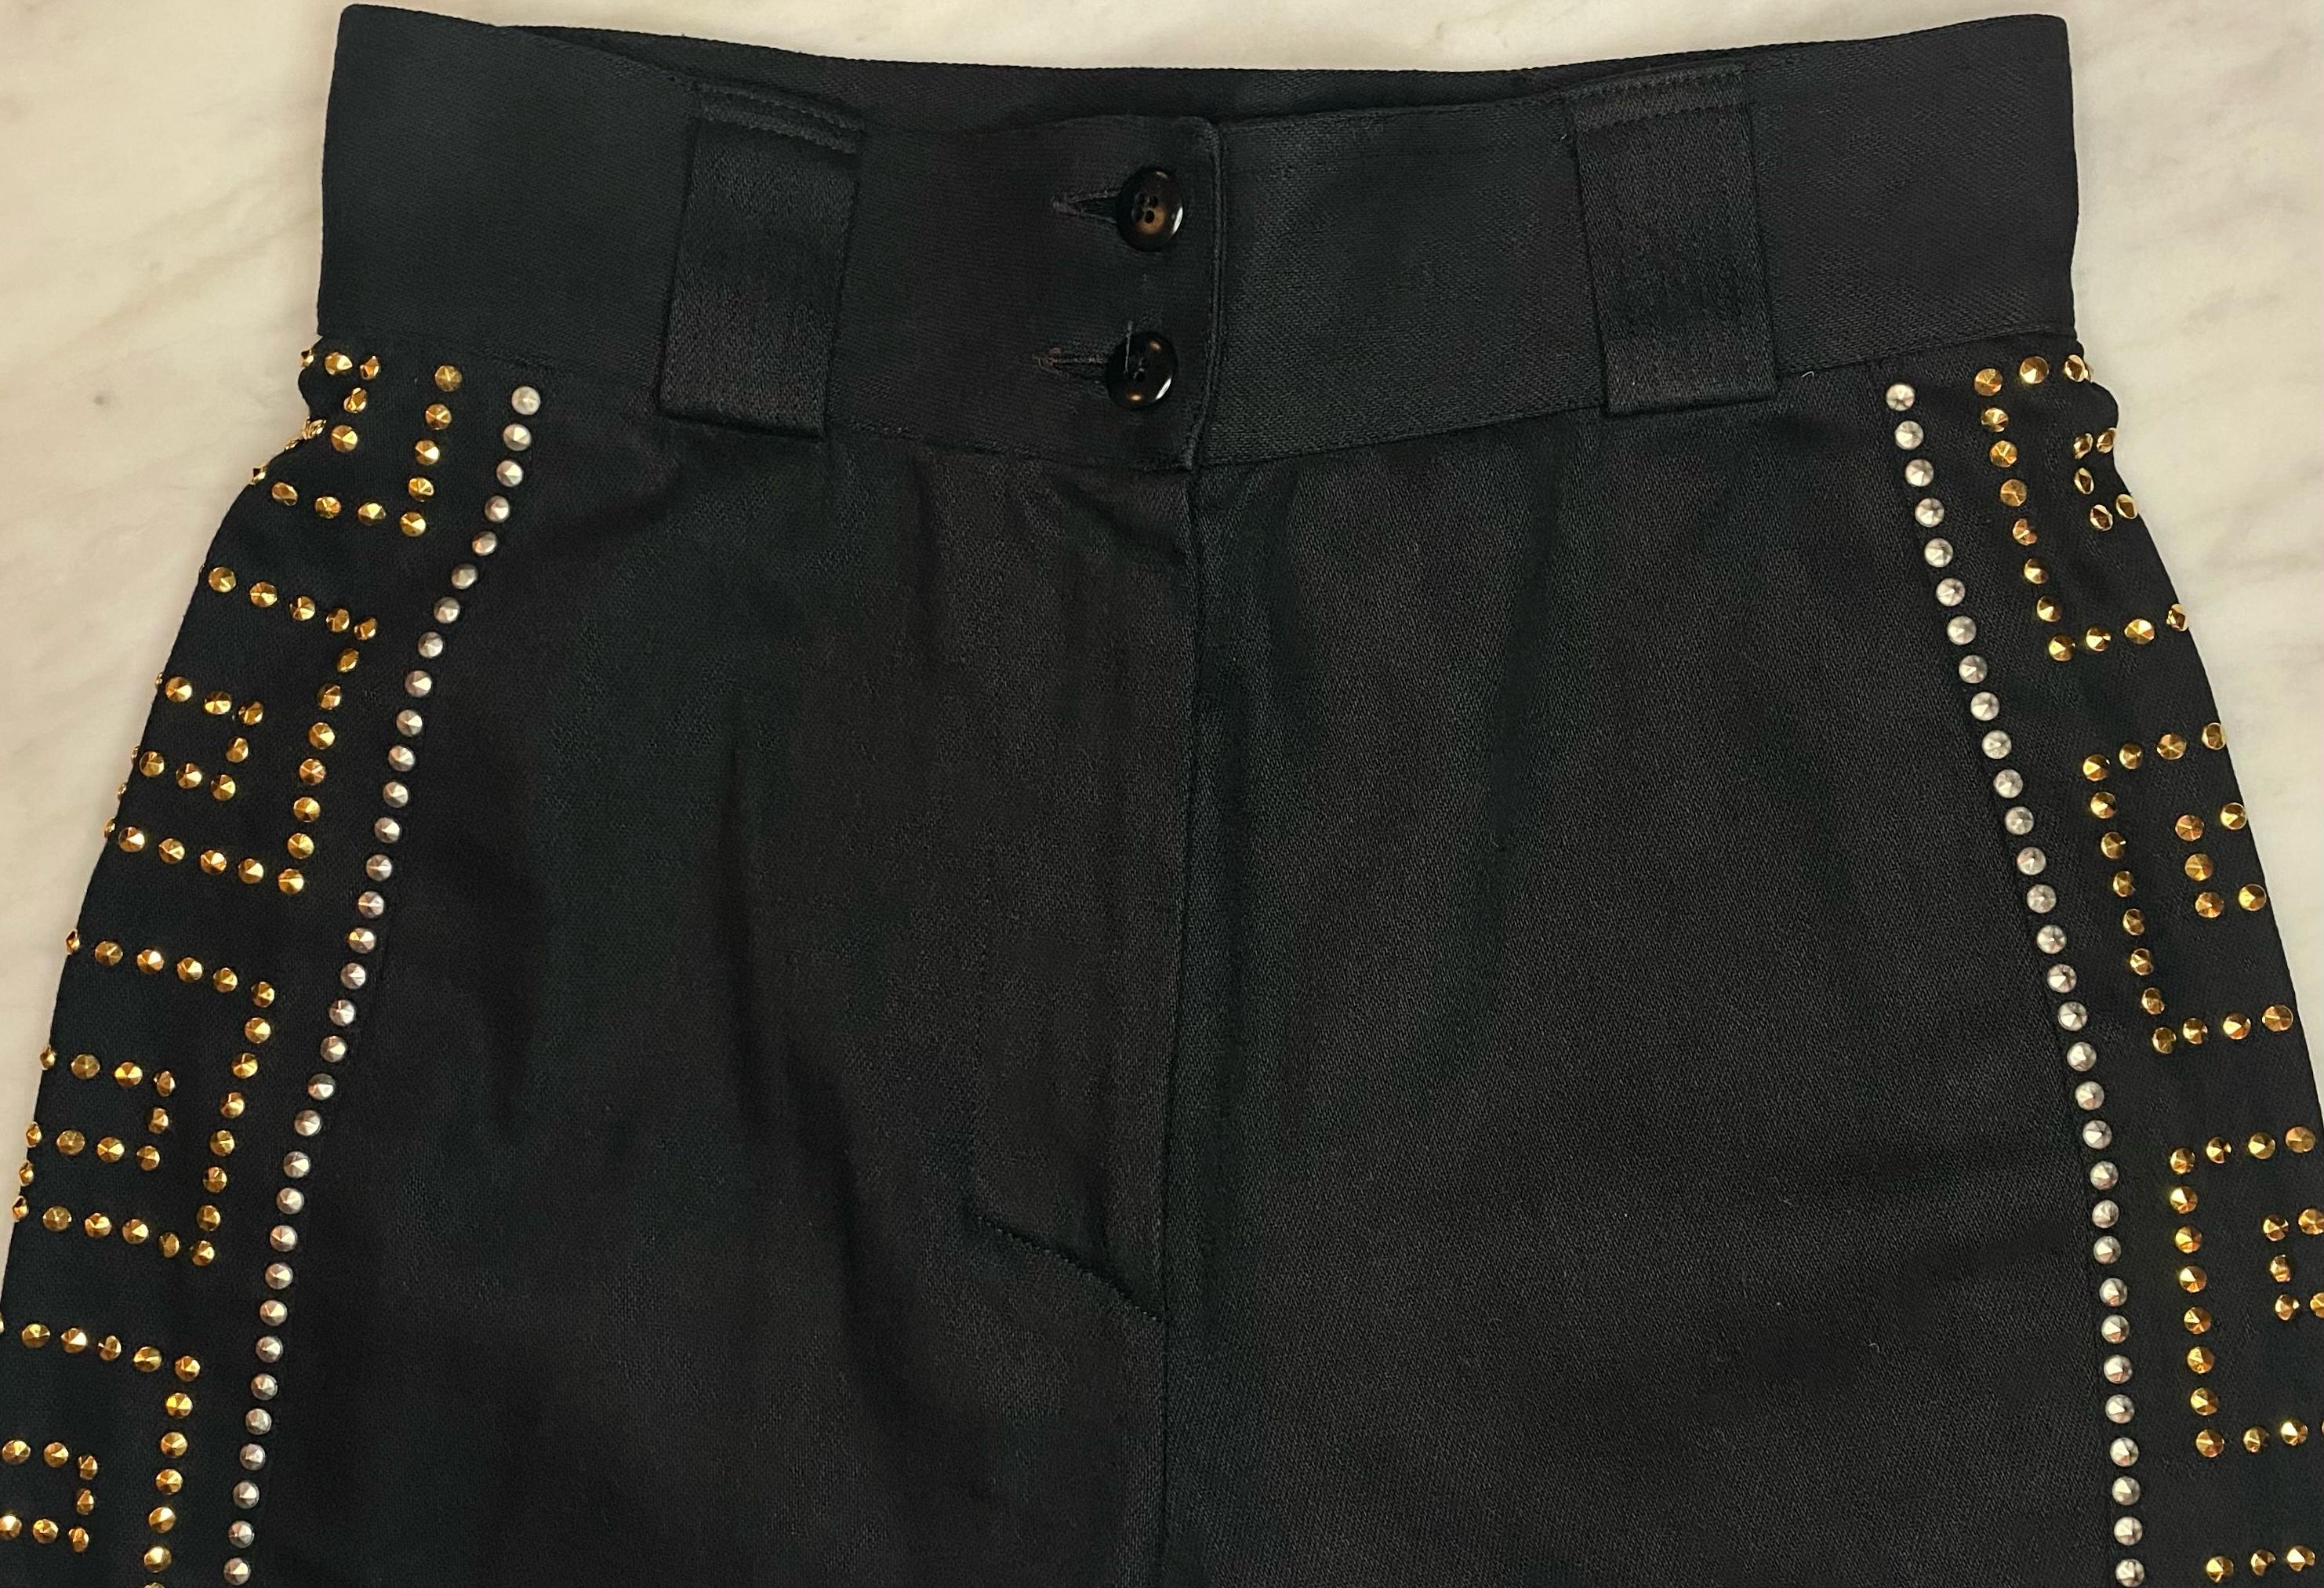 F/W 1992 Gianni Versace 'Miss S&M' Greek Key Studded High-Waisted Pants In Good Condition For Sale In West Hollywood, CA